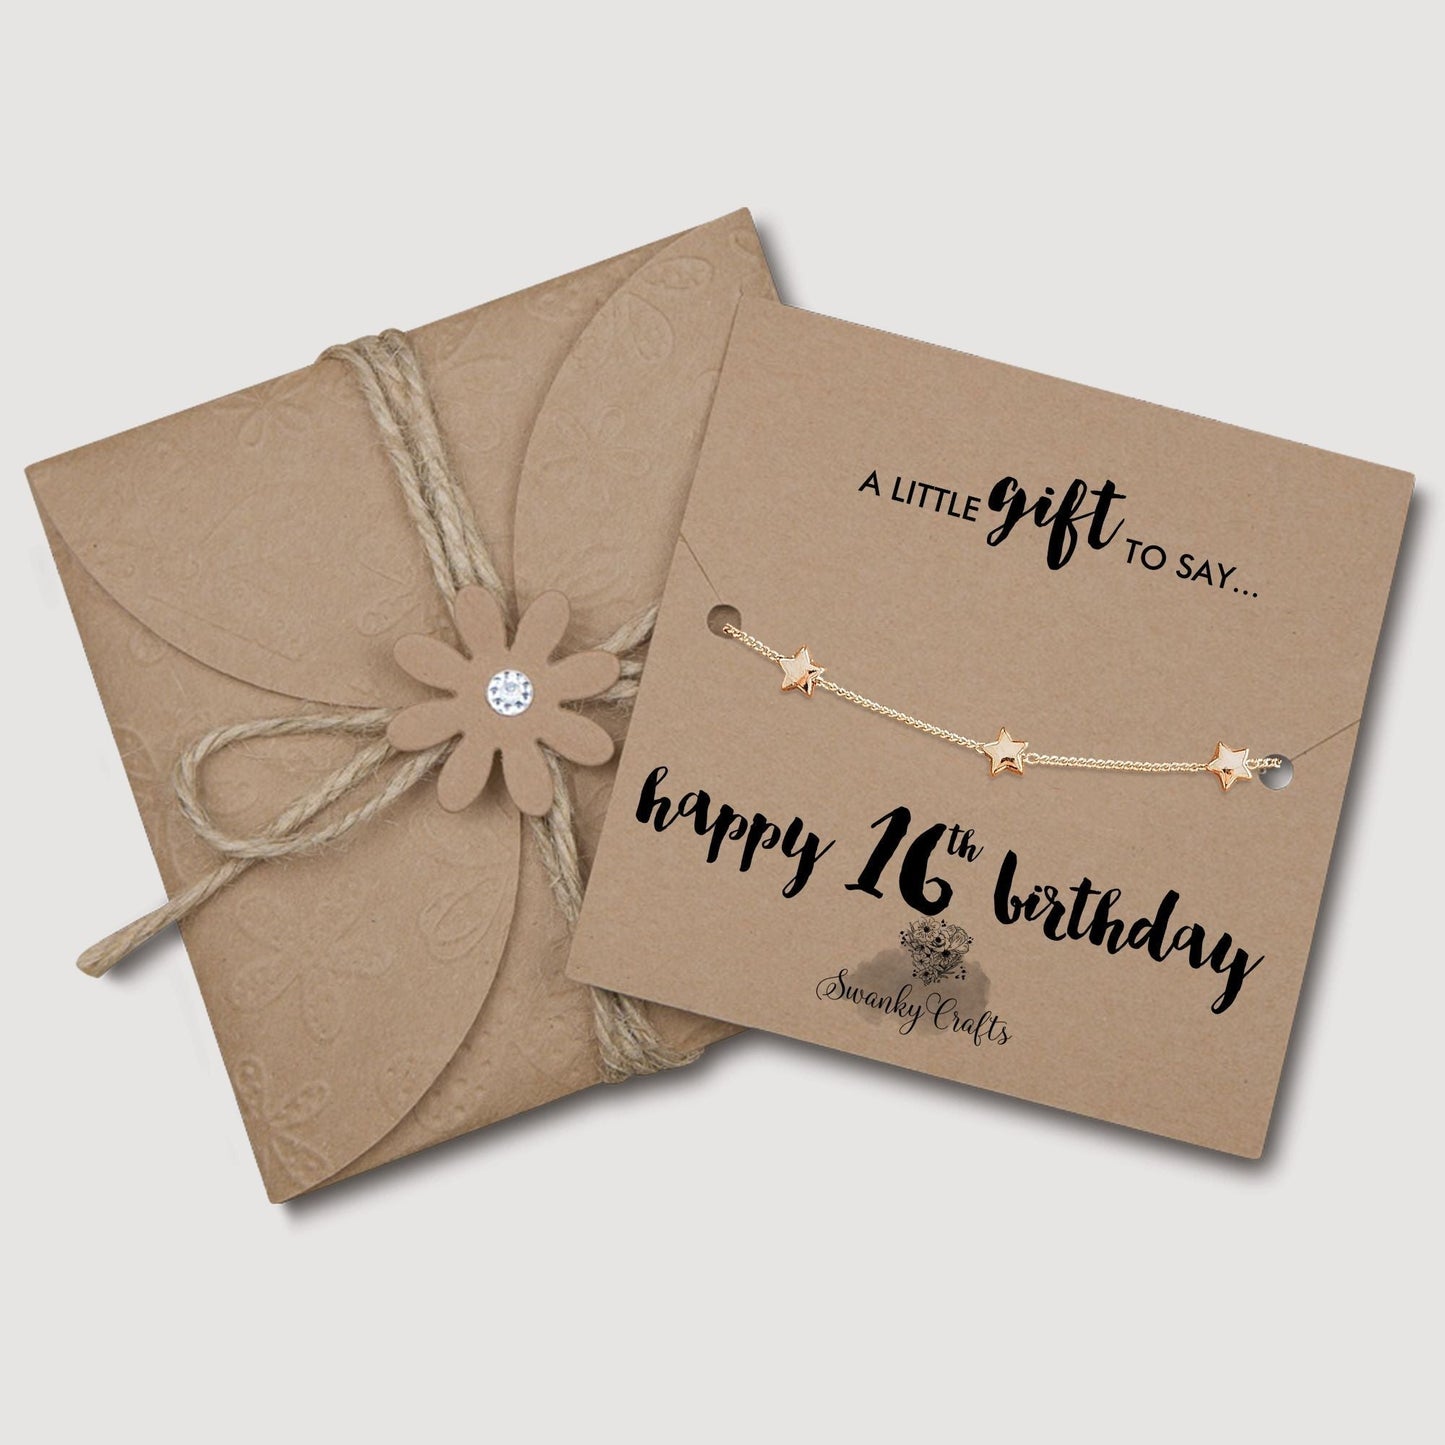 40th Birthday Gift - 925 Silver Star Bracelet with Card and Gift Wrap